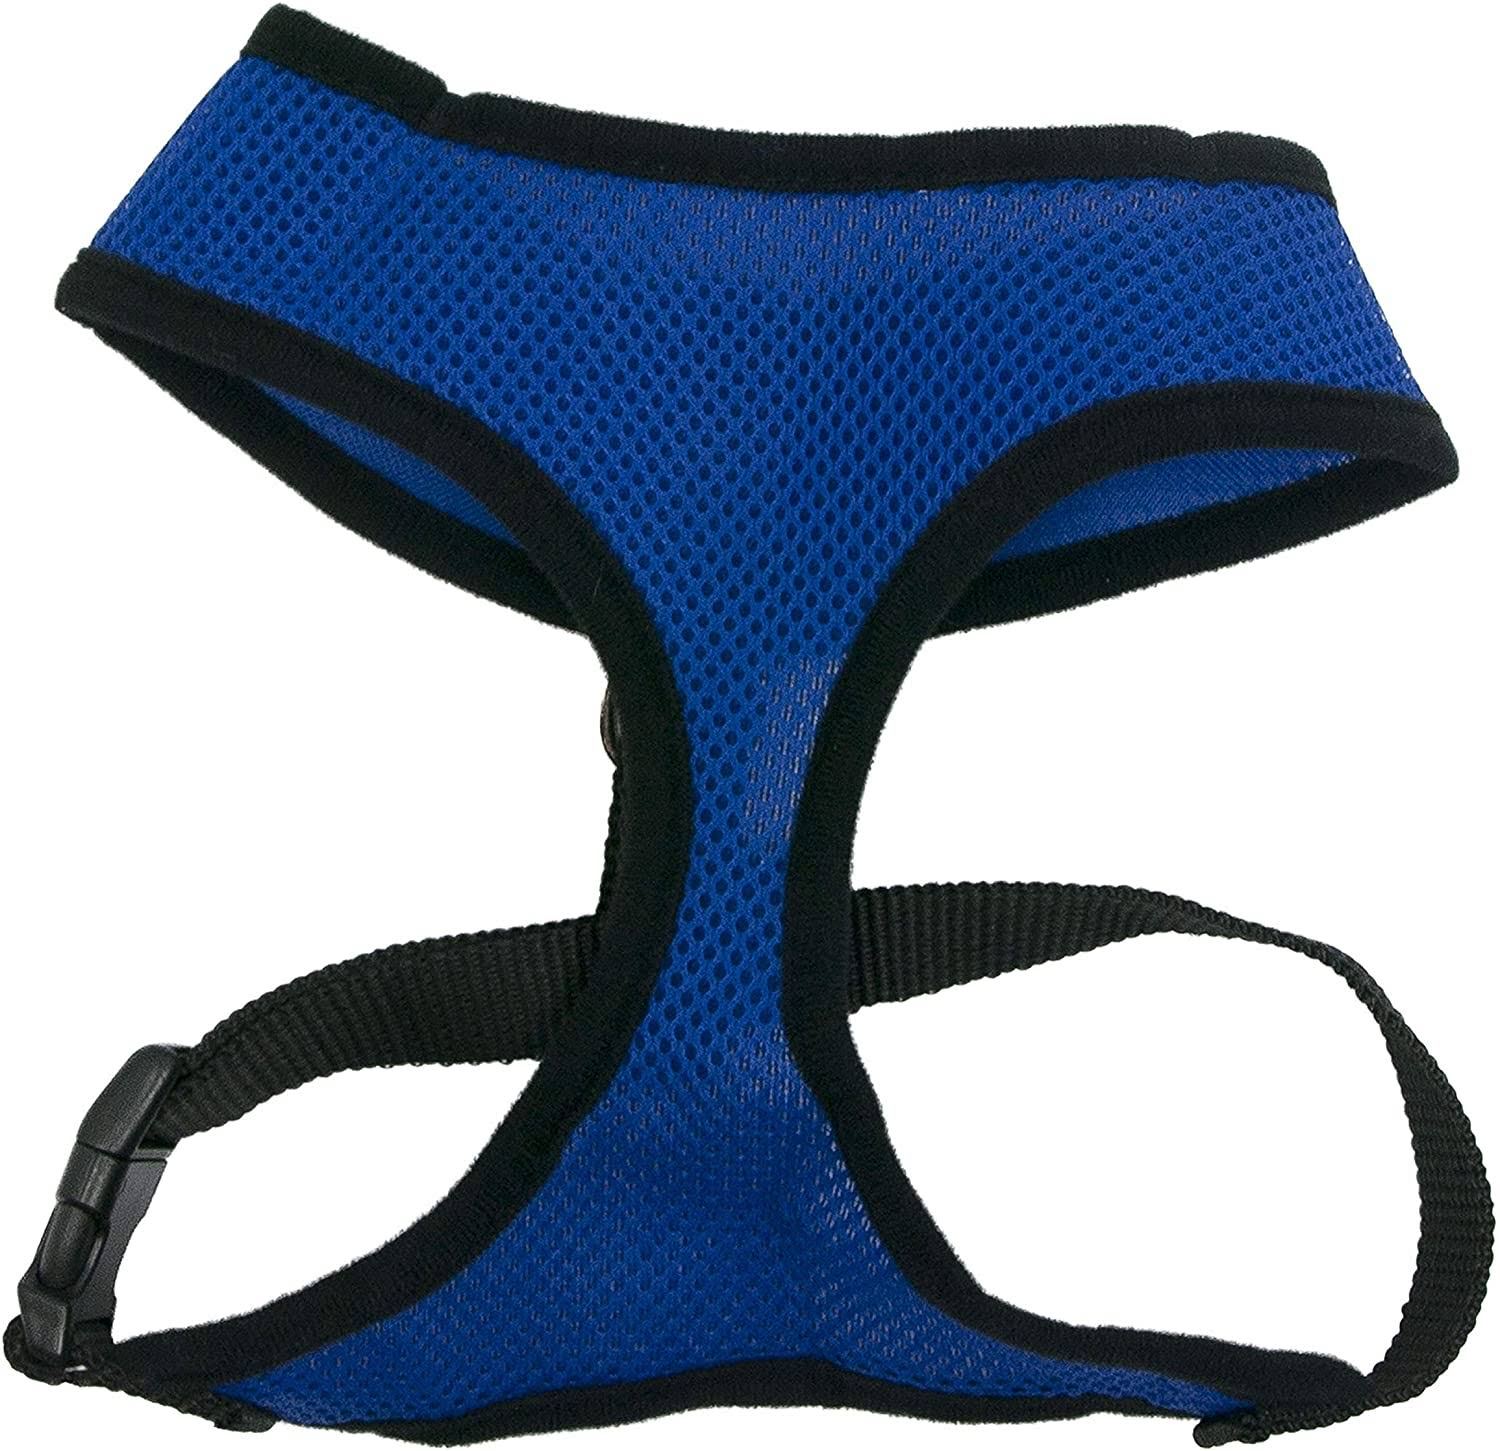 Four Paws Comfort Control Dog Harness - Blue, Small